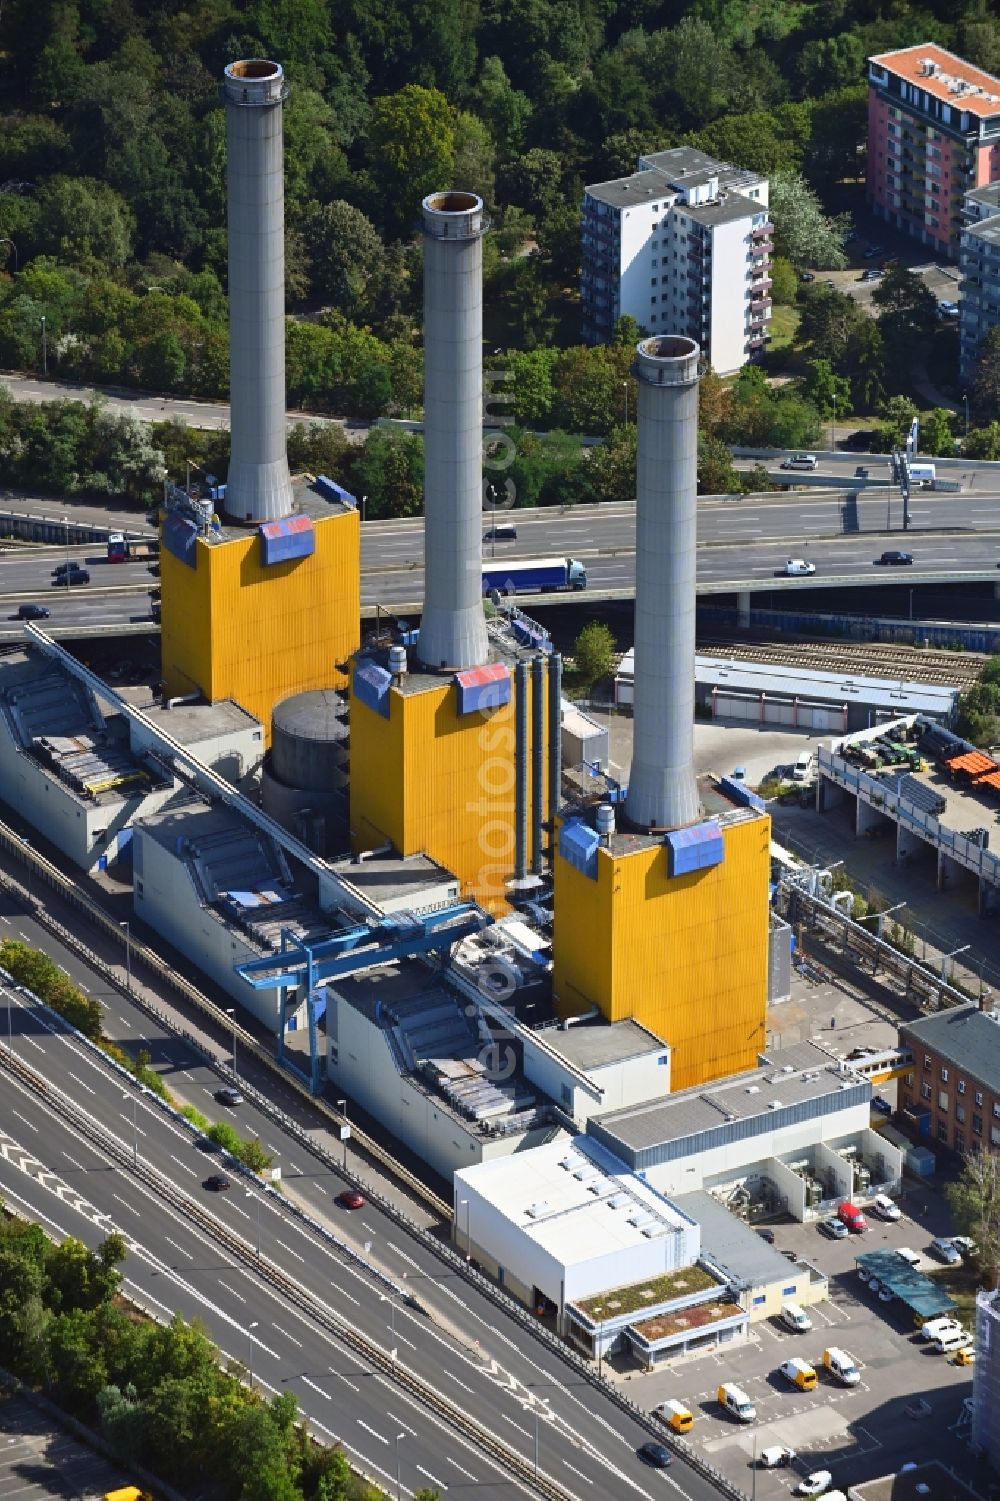 Berlin from the bird's eye view: Power plants and exhaust towers of thermal power station Wilmersdorf on Forckenbeckstrasse in Berlin, Germany